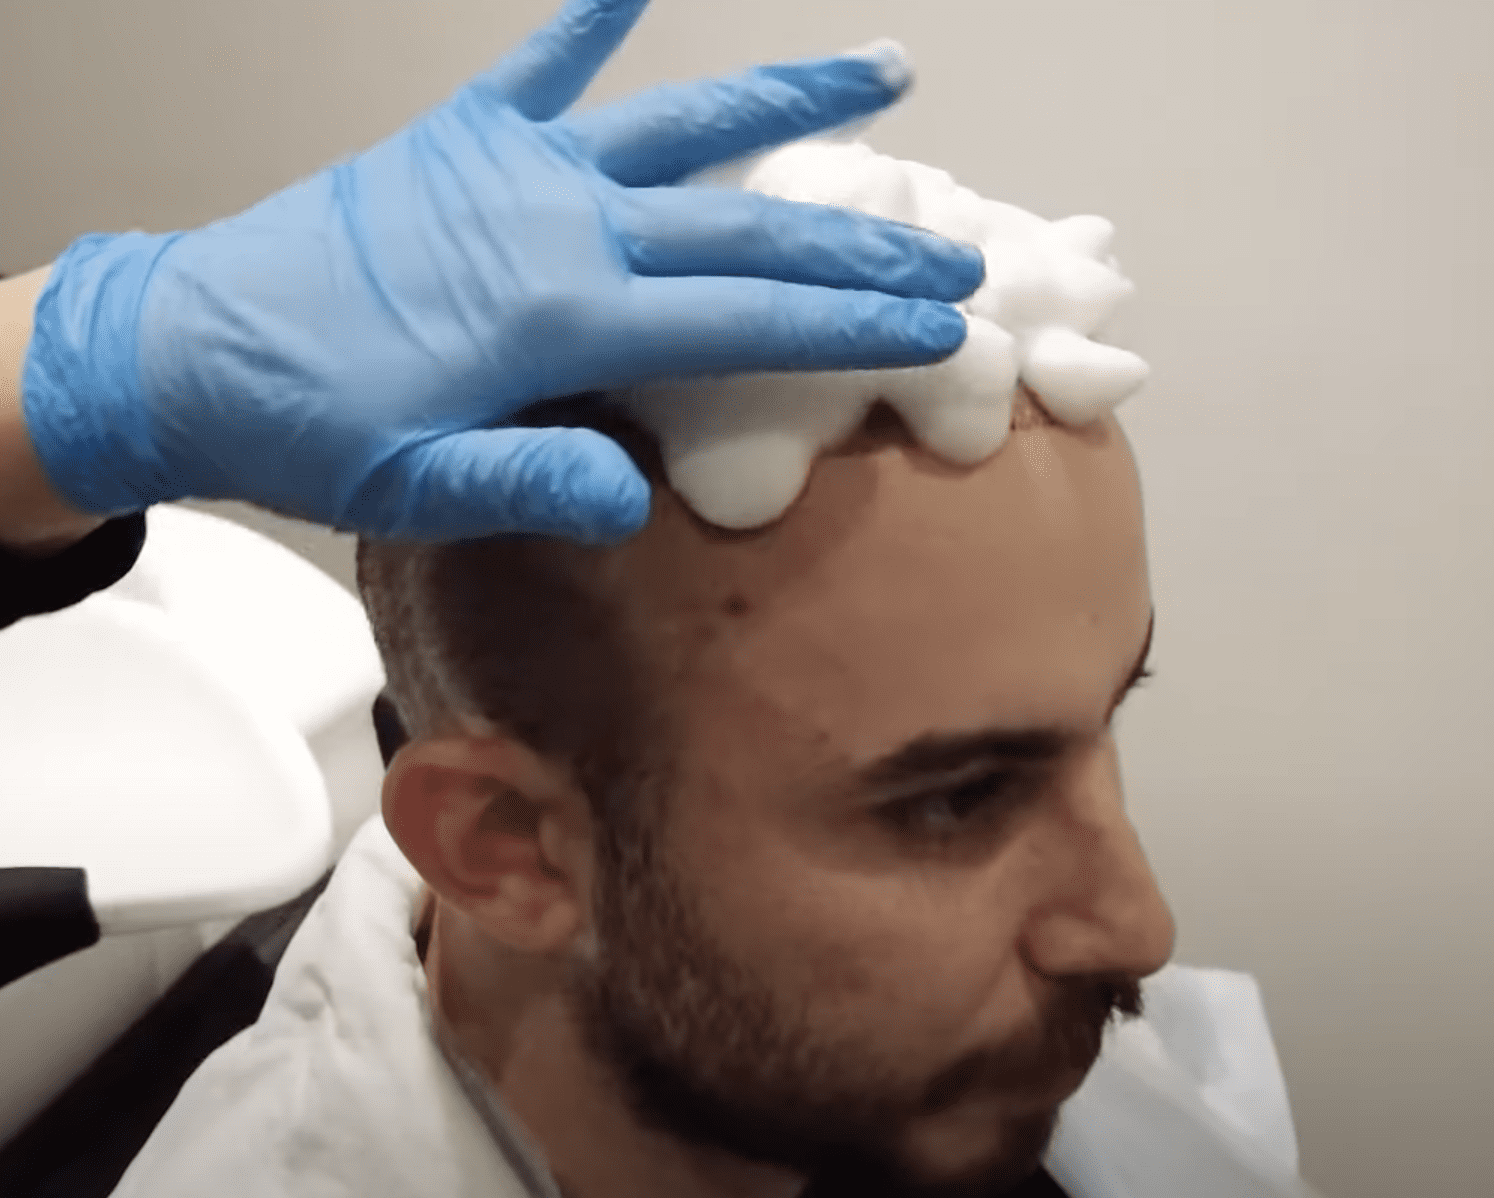 Hair Transplant Scars and Scabs